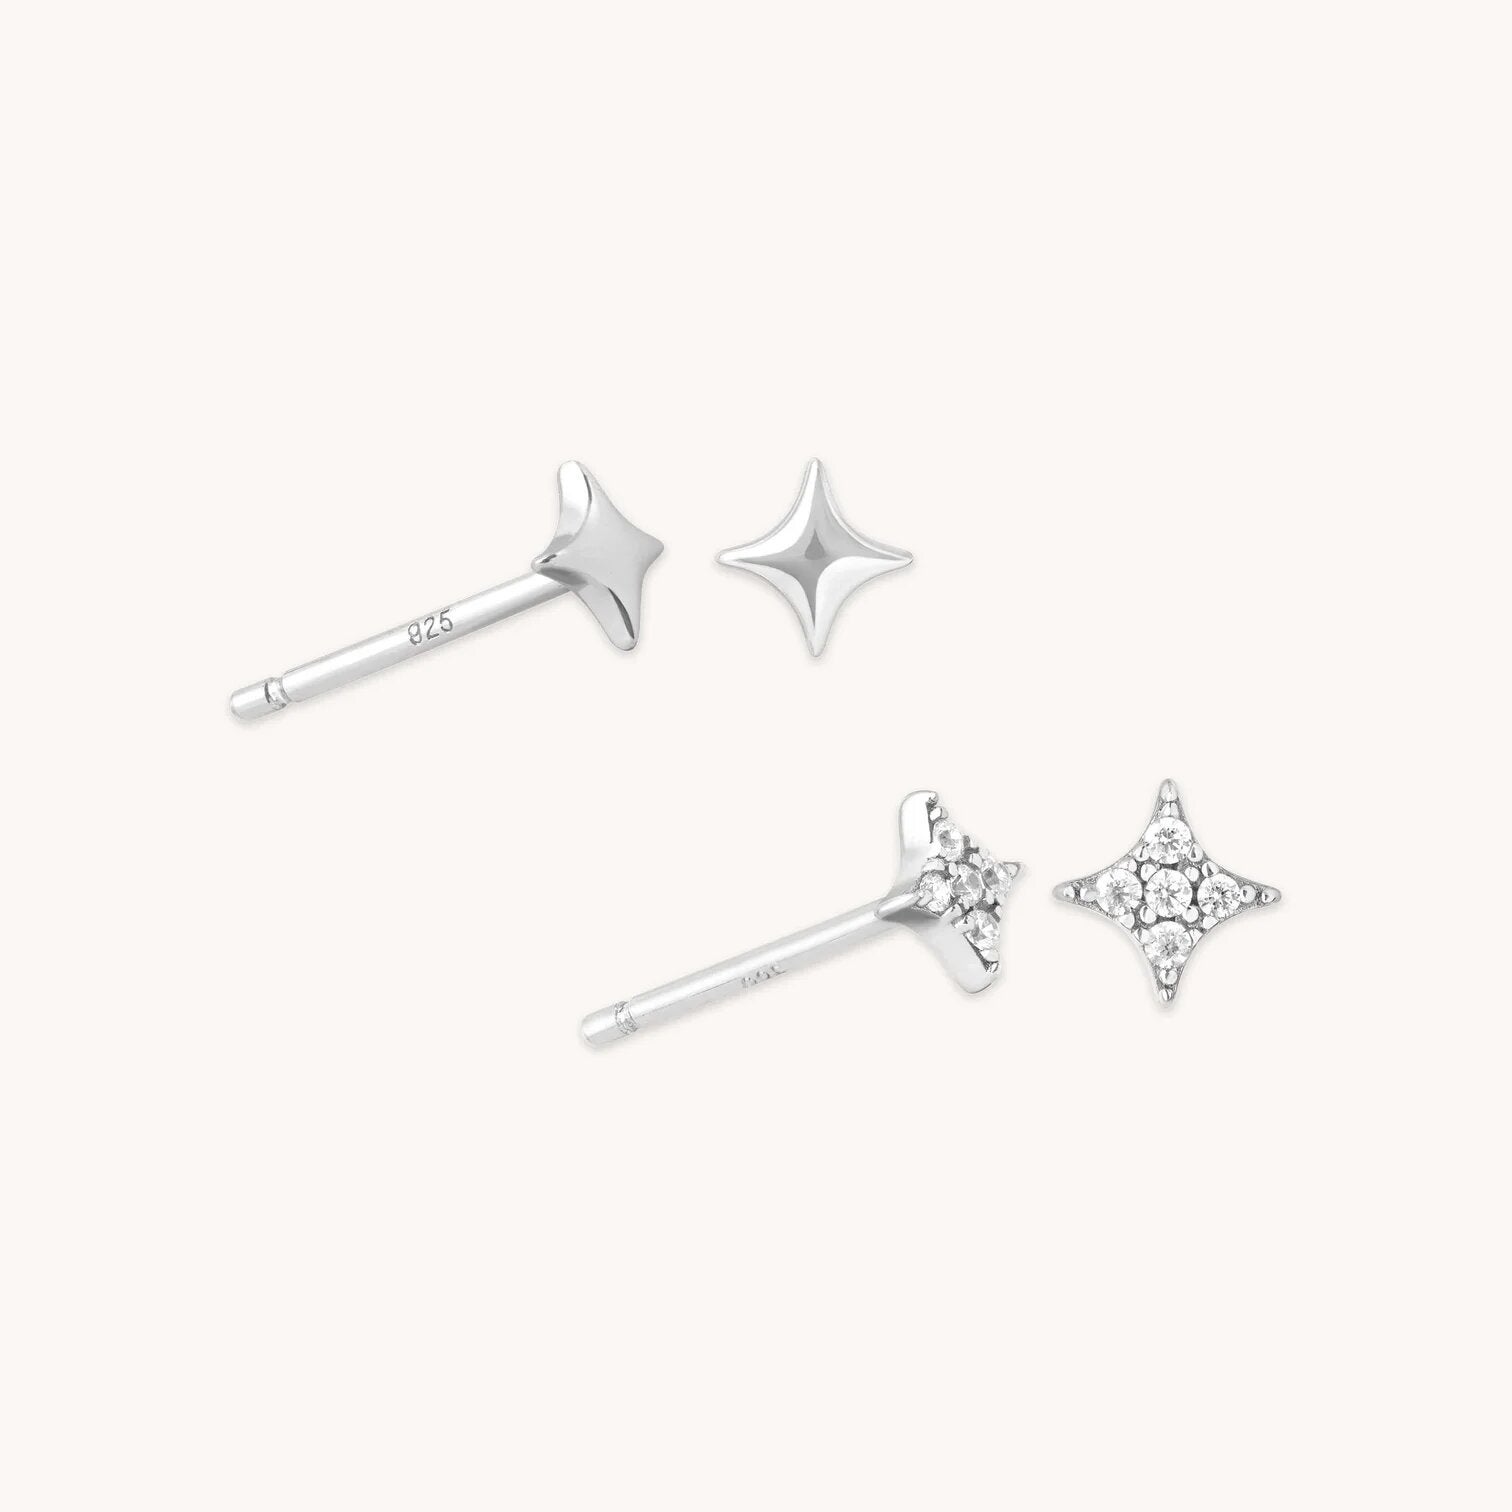 Cate & Chloe Ariel 18K White Gold Halo CZ Stud Earrings, Silver Simulated